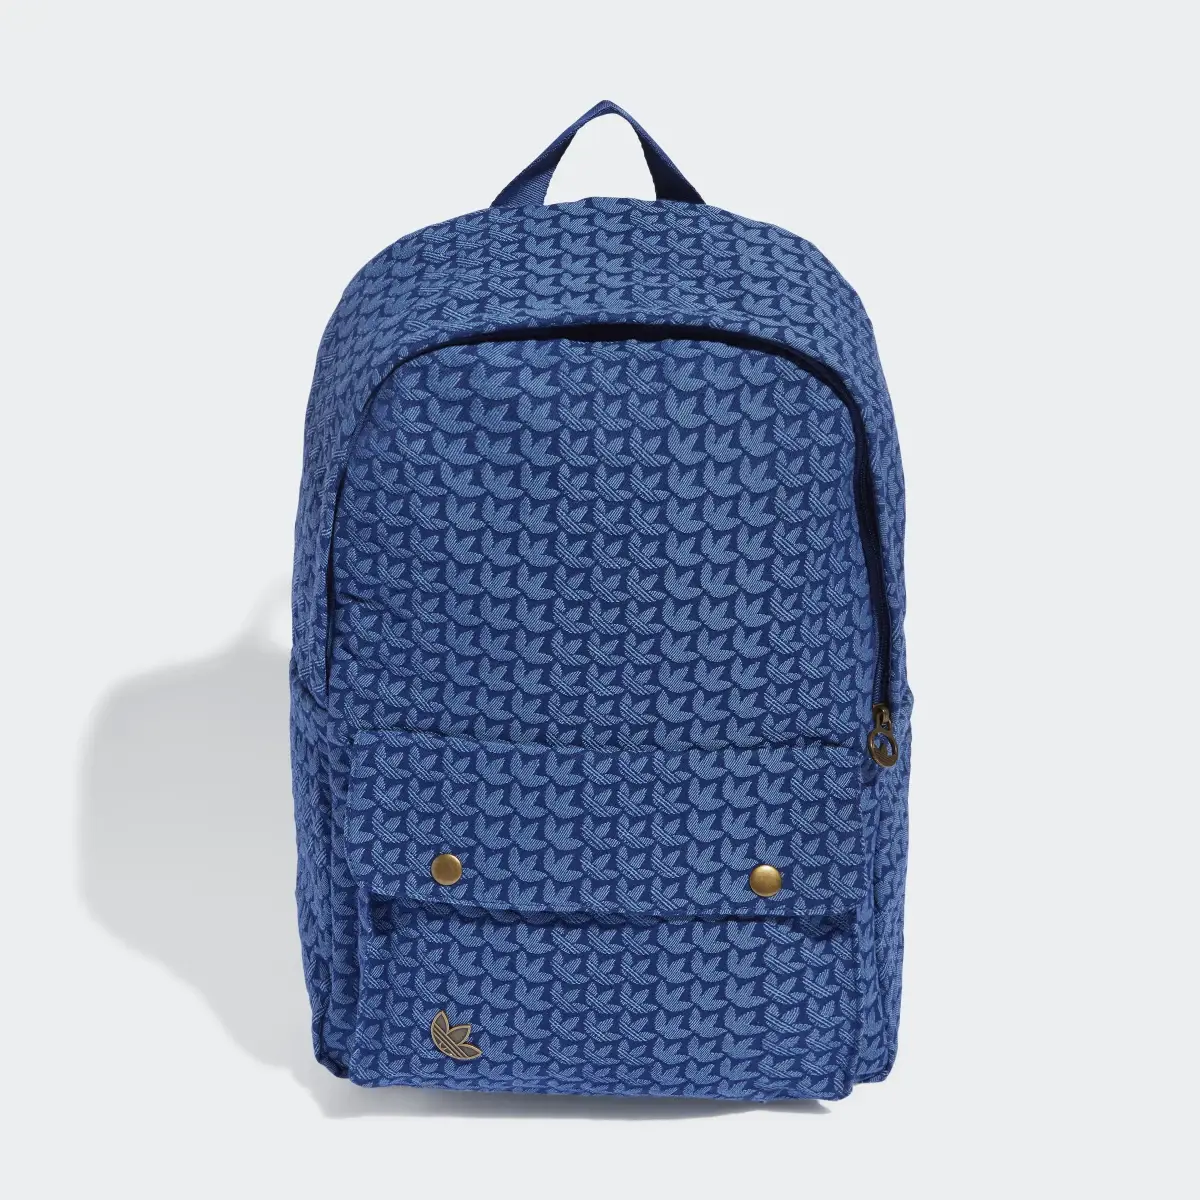 Adidas Classic Backpack. 2